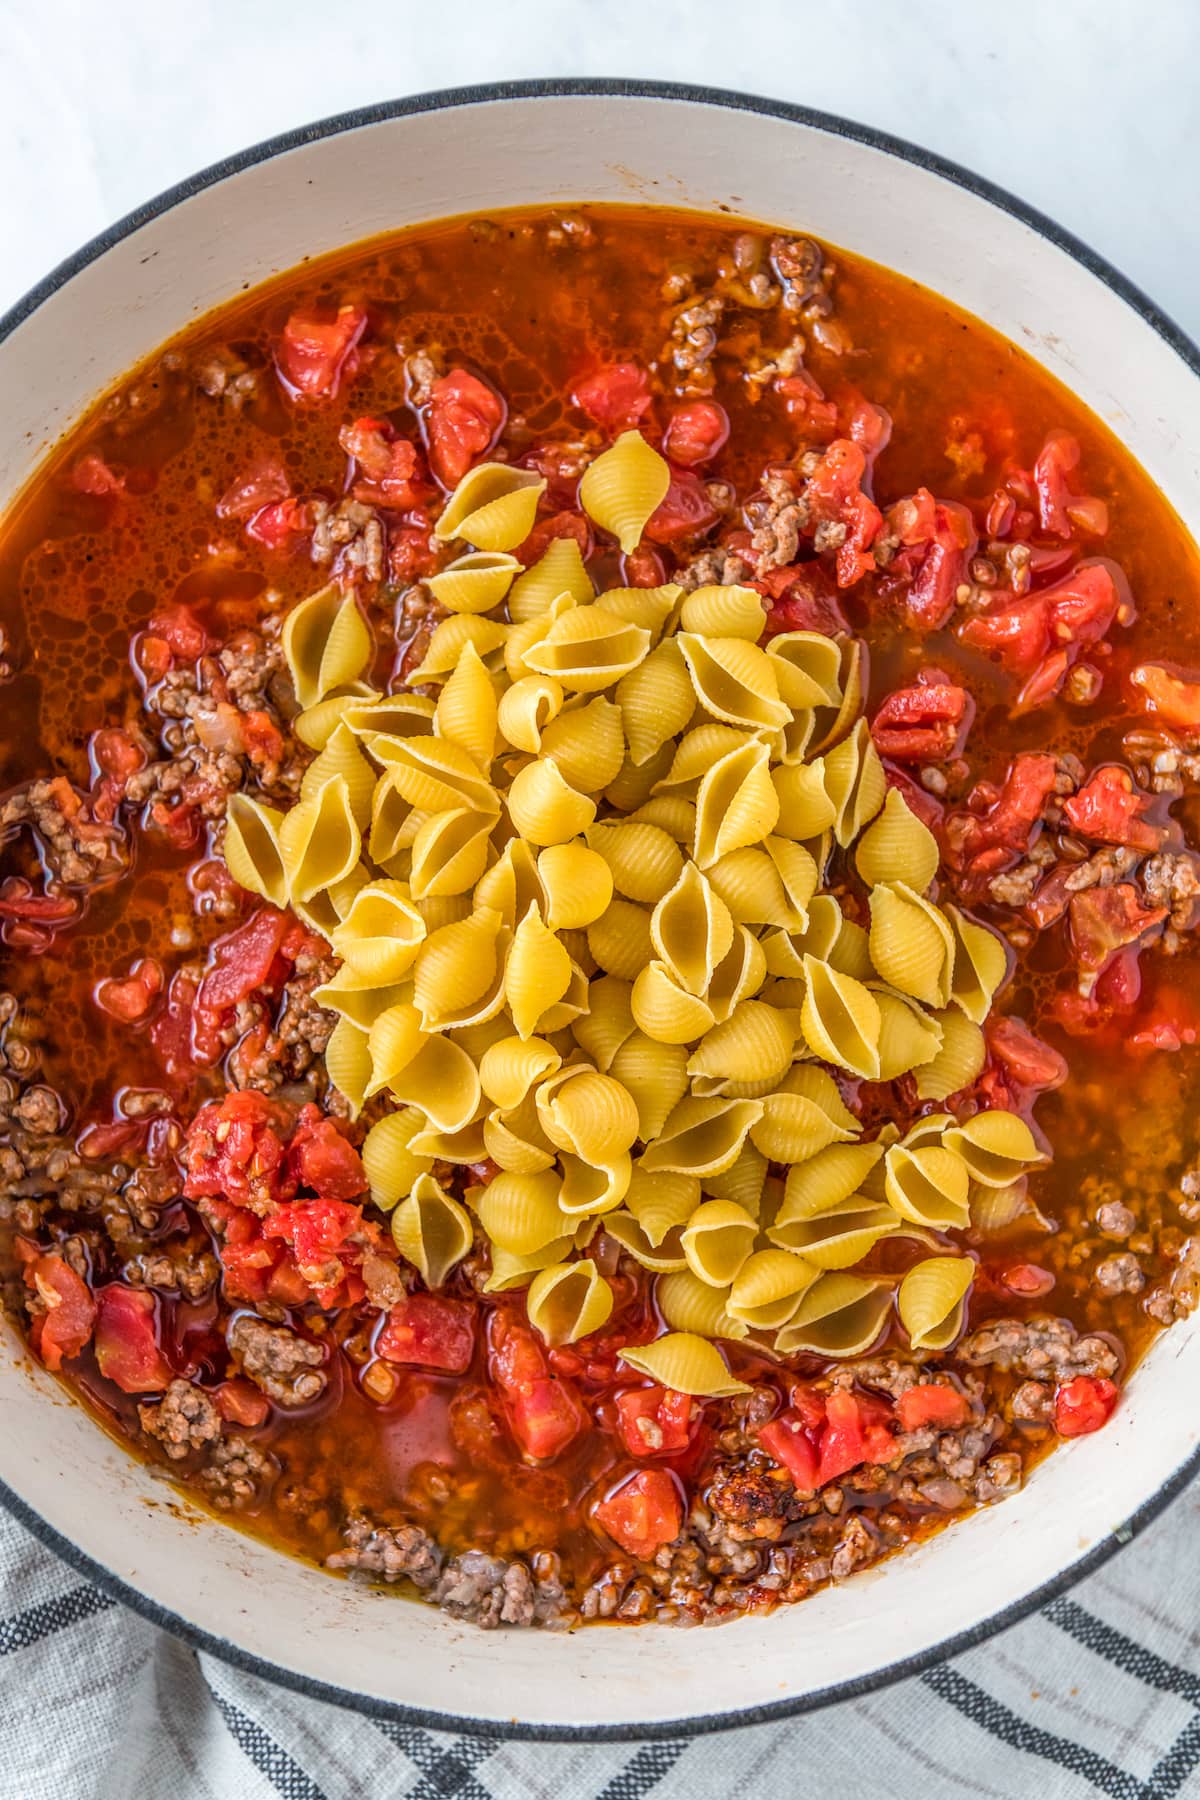 dried pasta in a pot with ground beef and tomato sauce